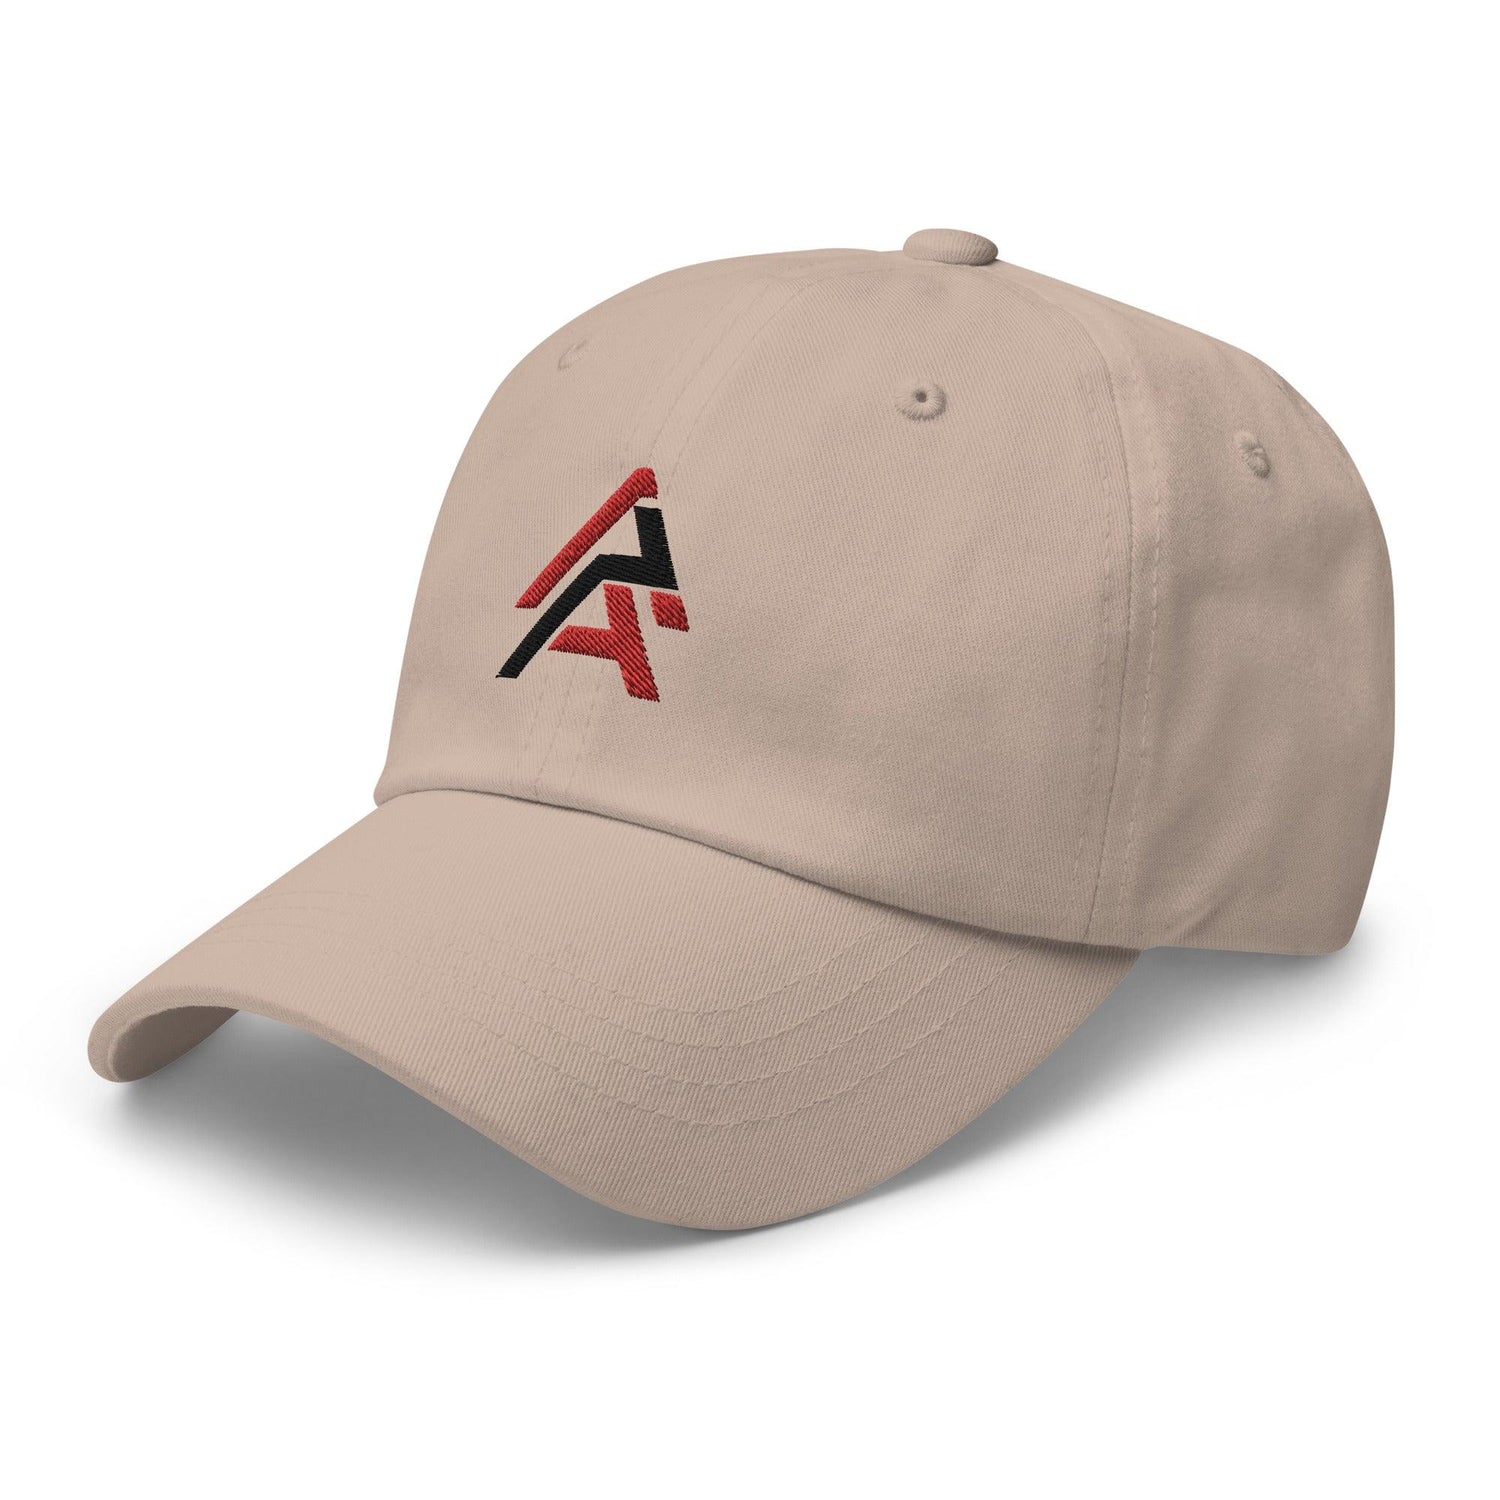 Anthony Alford “AA” hat - Fan Arch